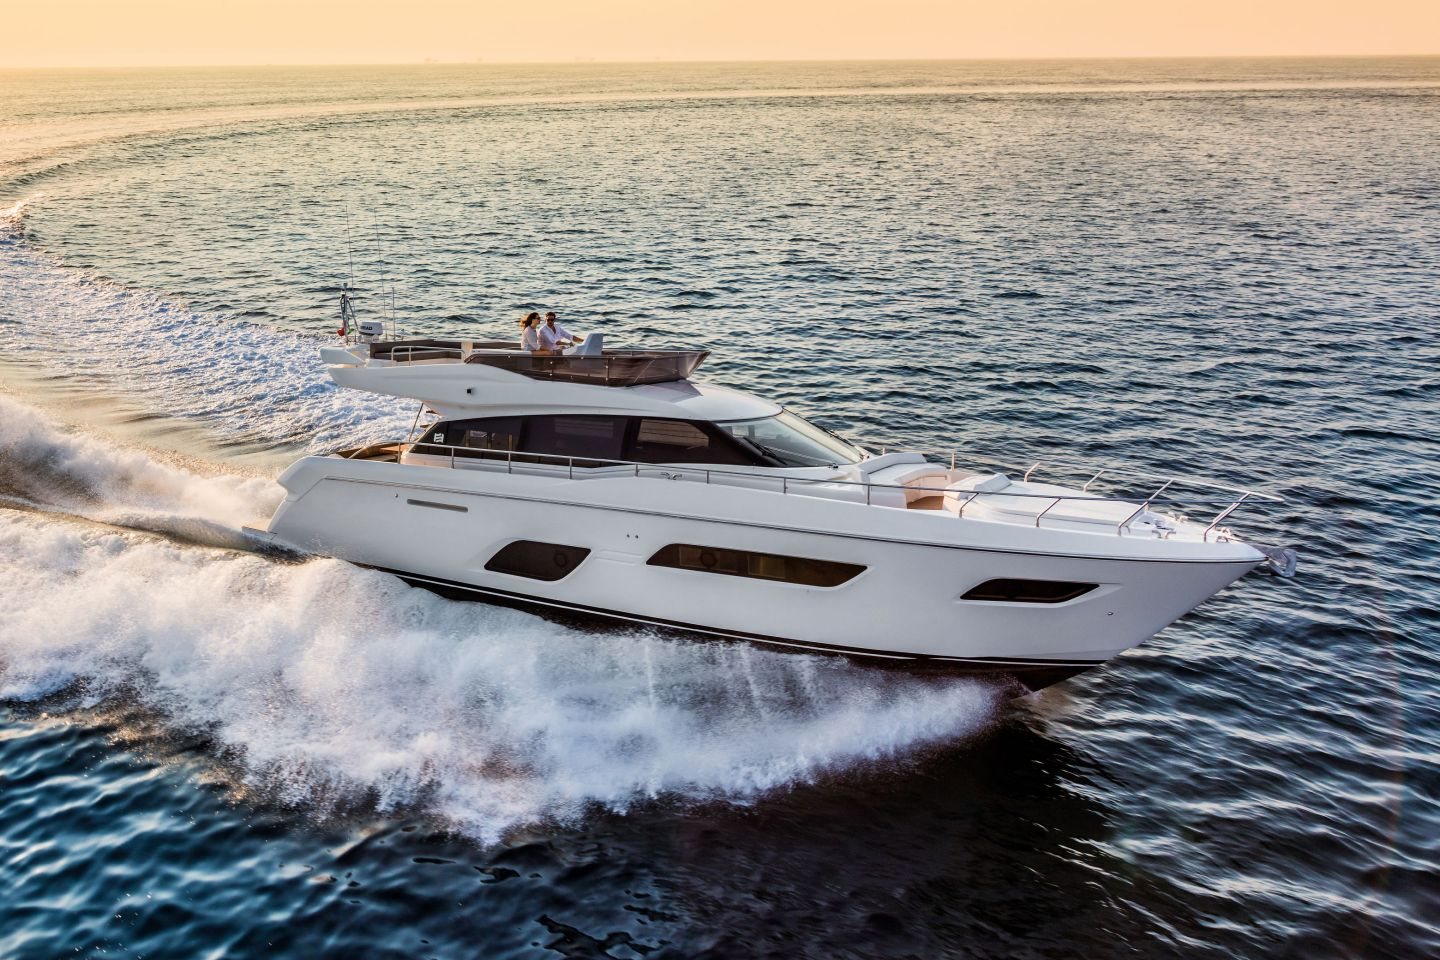 360 VR Virtual Tours of the Ferretti Yachts 550